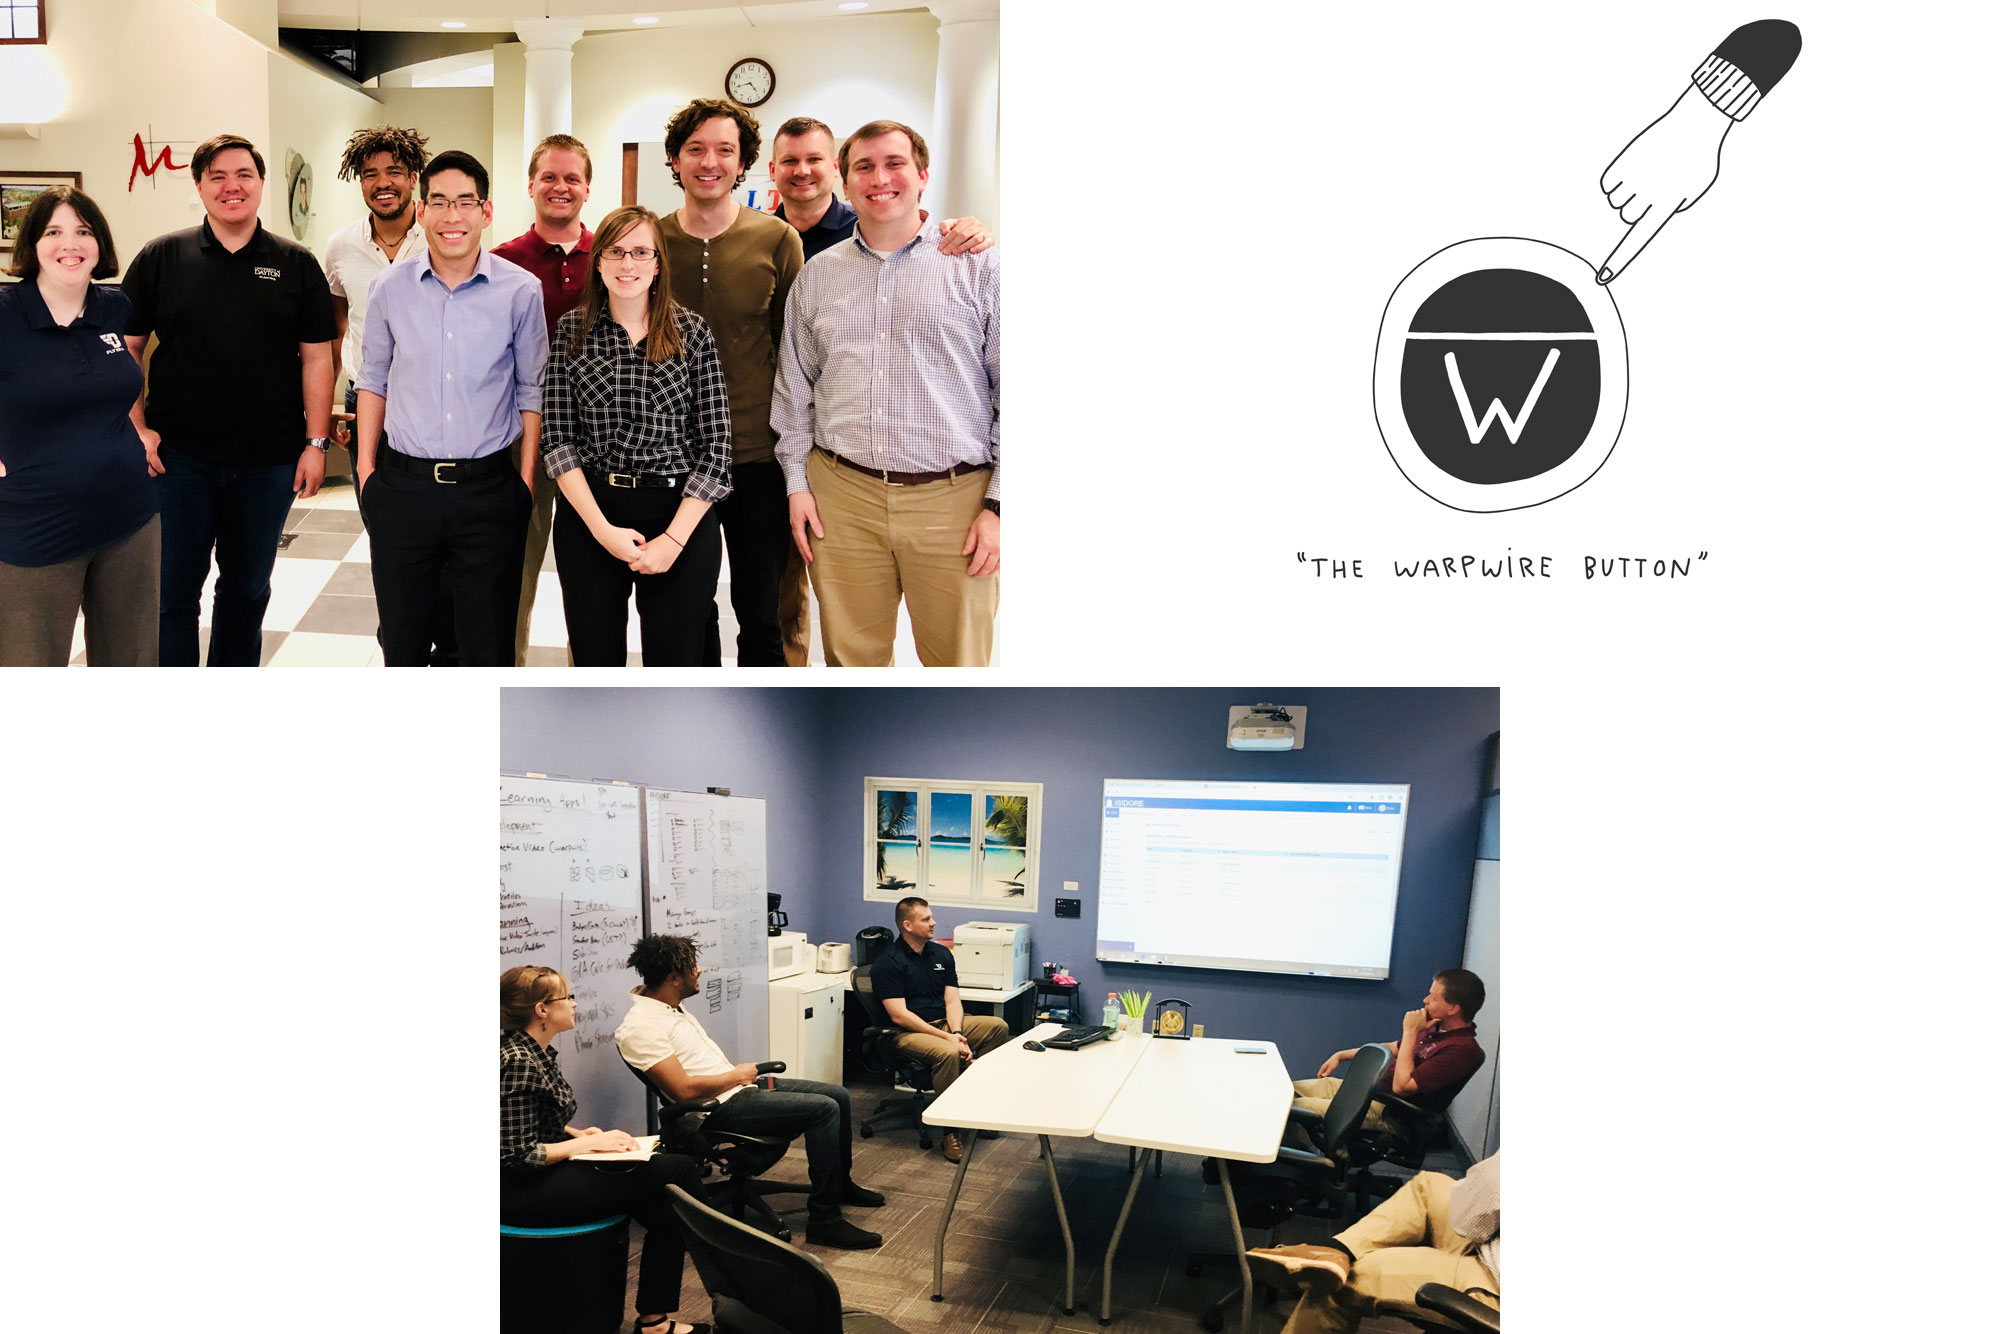 Photographs of the Warpwire team visiting the University of Dayton and a Warpwire button graphic